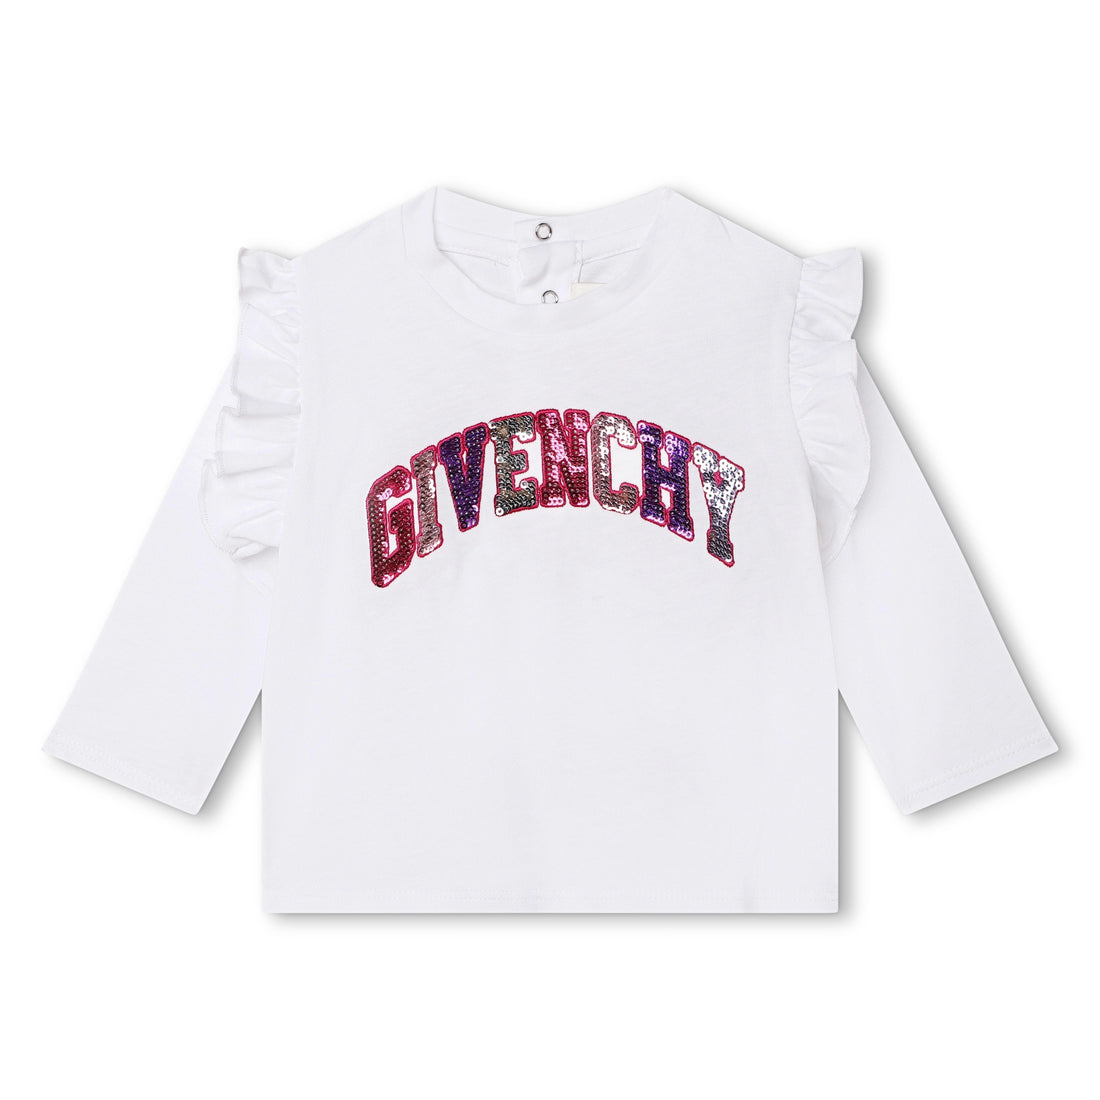 Givenchy Long Sleeve T-Shirt Style: H05284